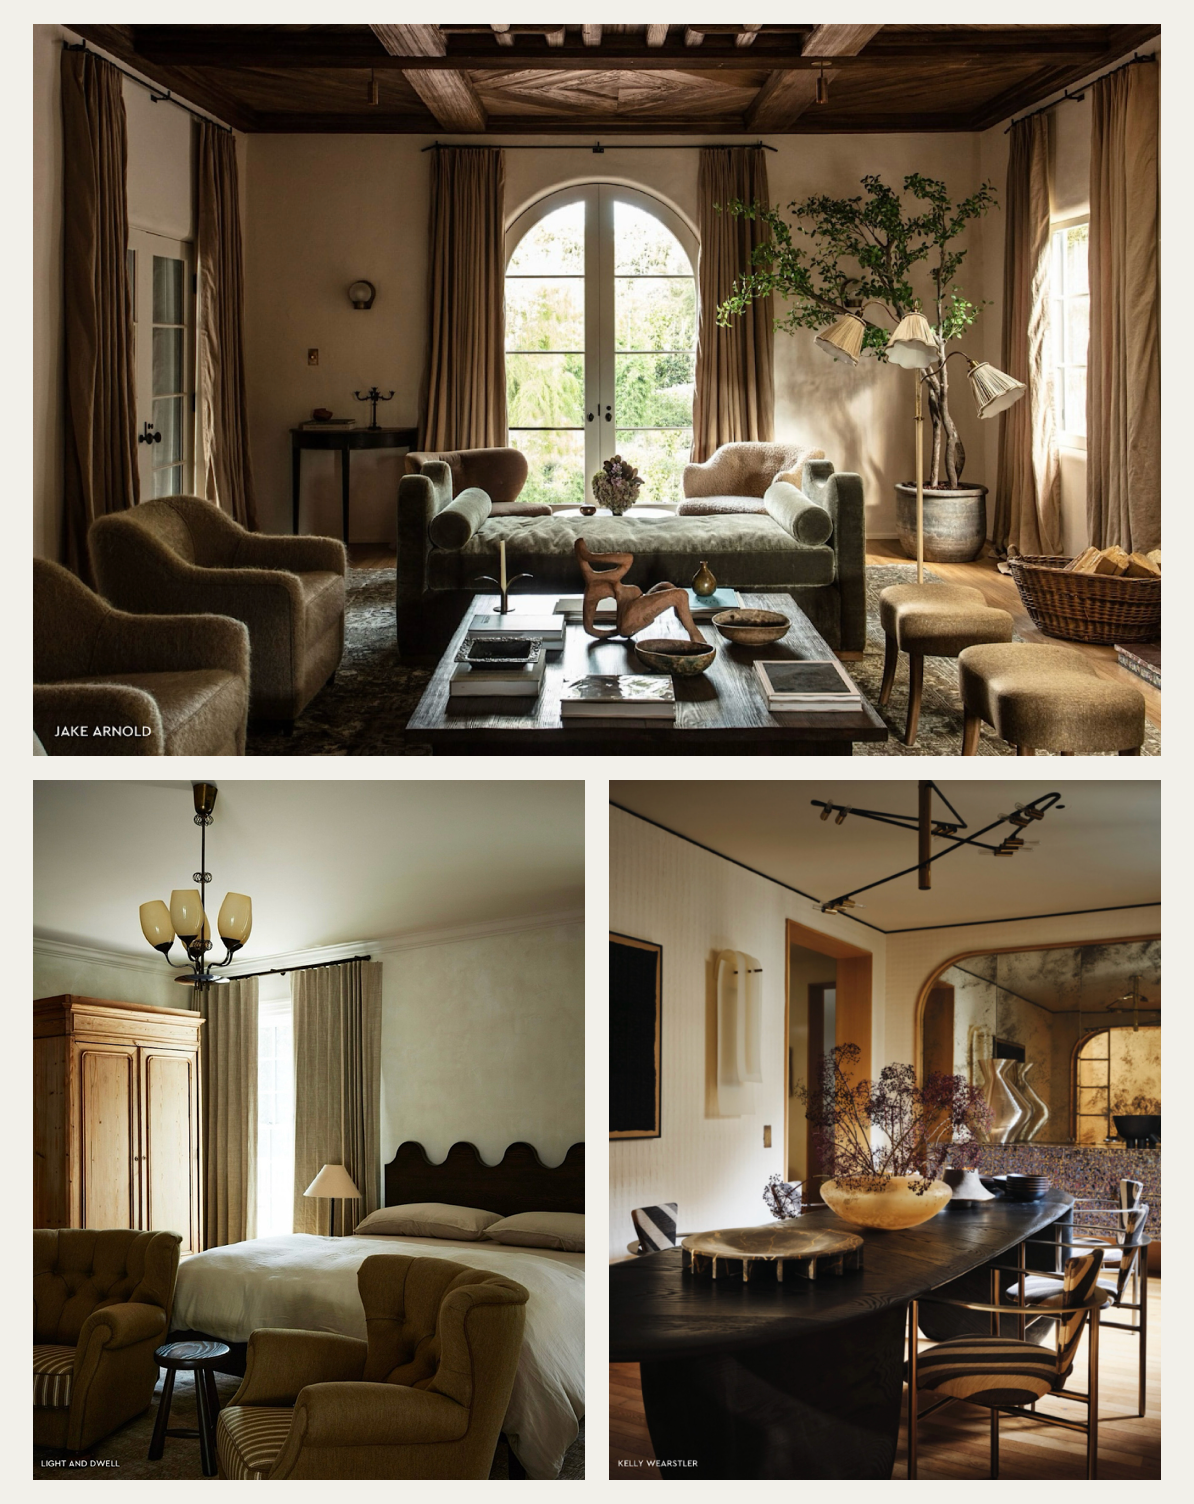 A collage of images featuring curved furniture forms in interior design.